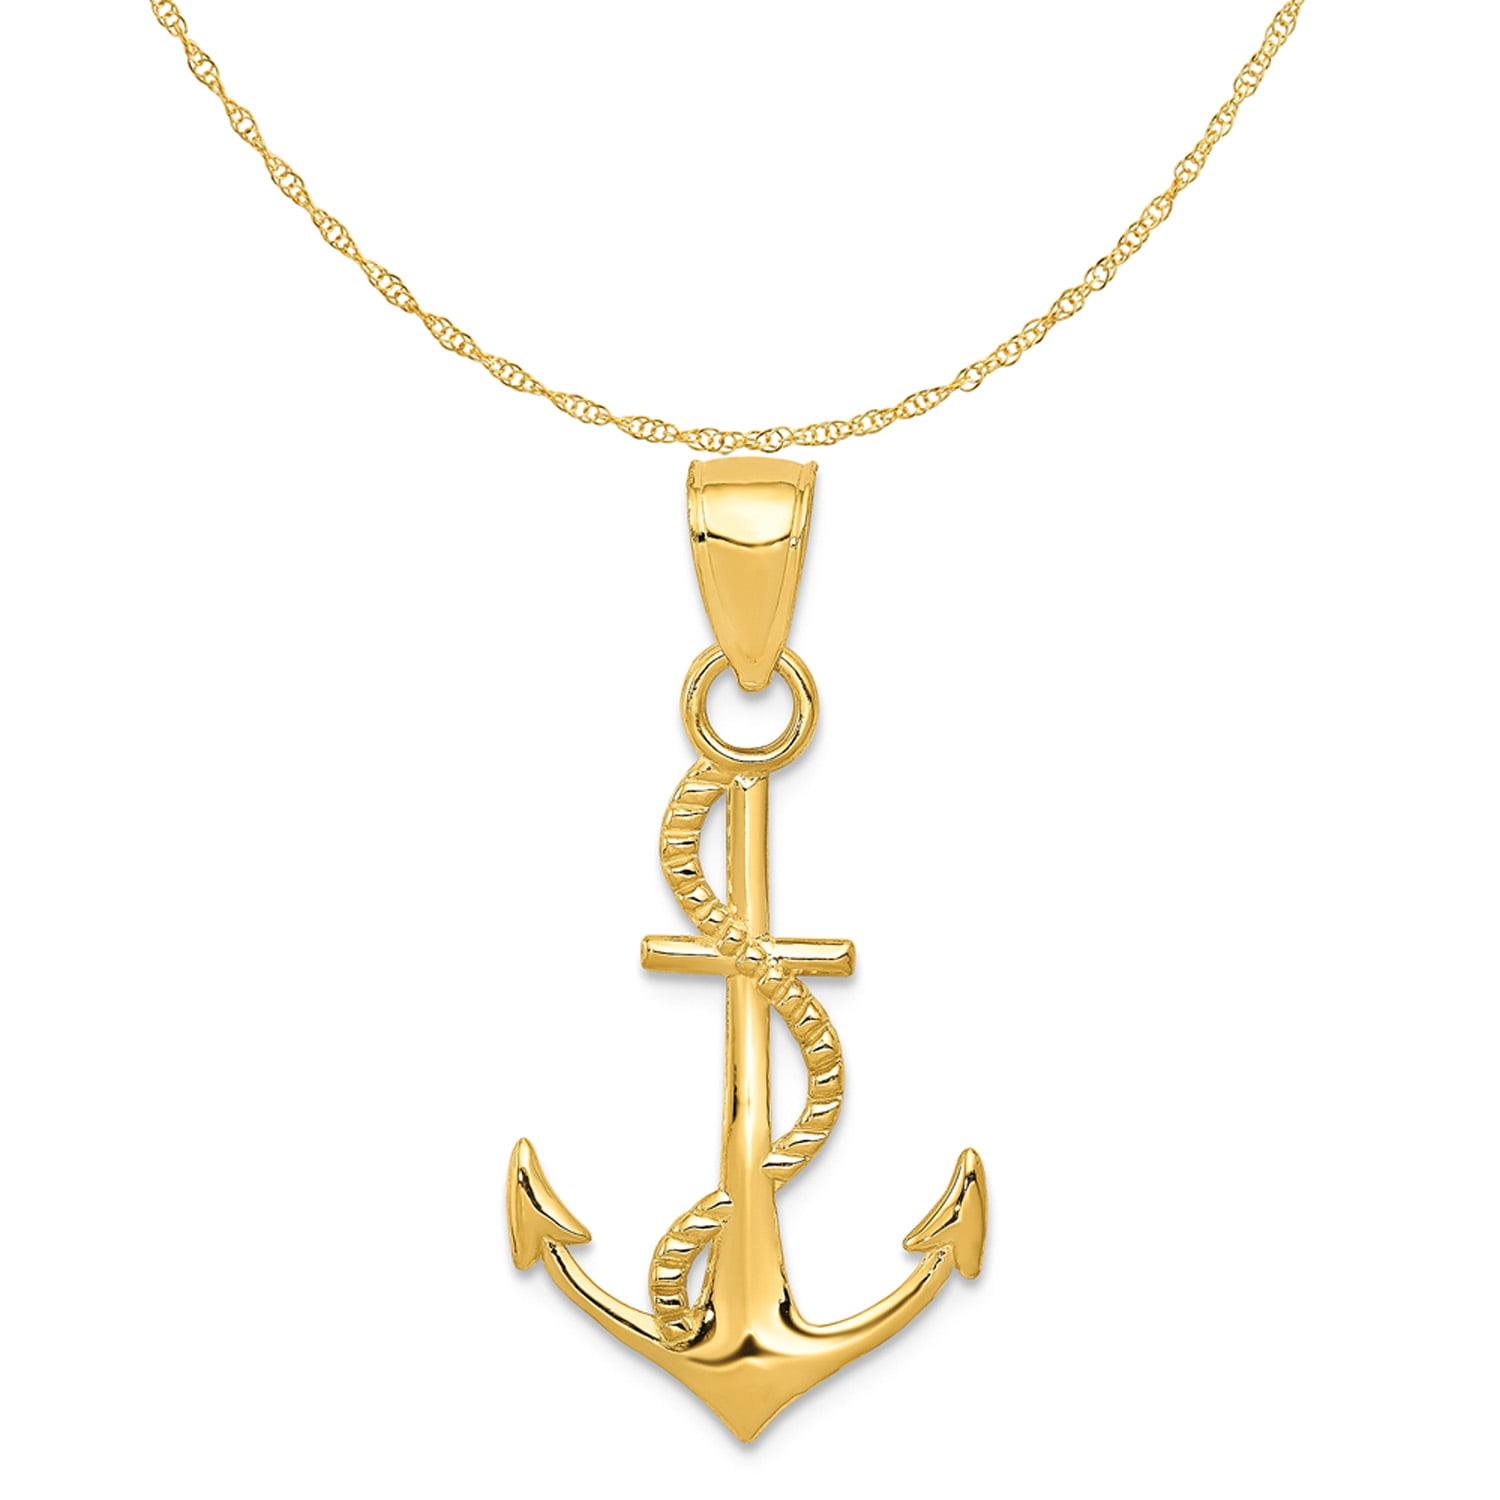 Anchor Rope Pendant 14K Solid Yellow Gold Charm for Chain Necklace NEW 